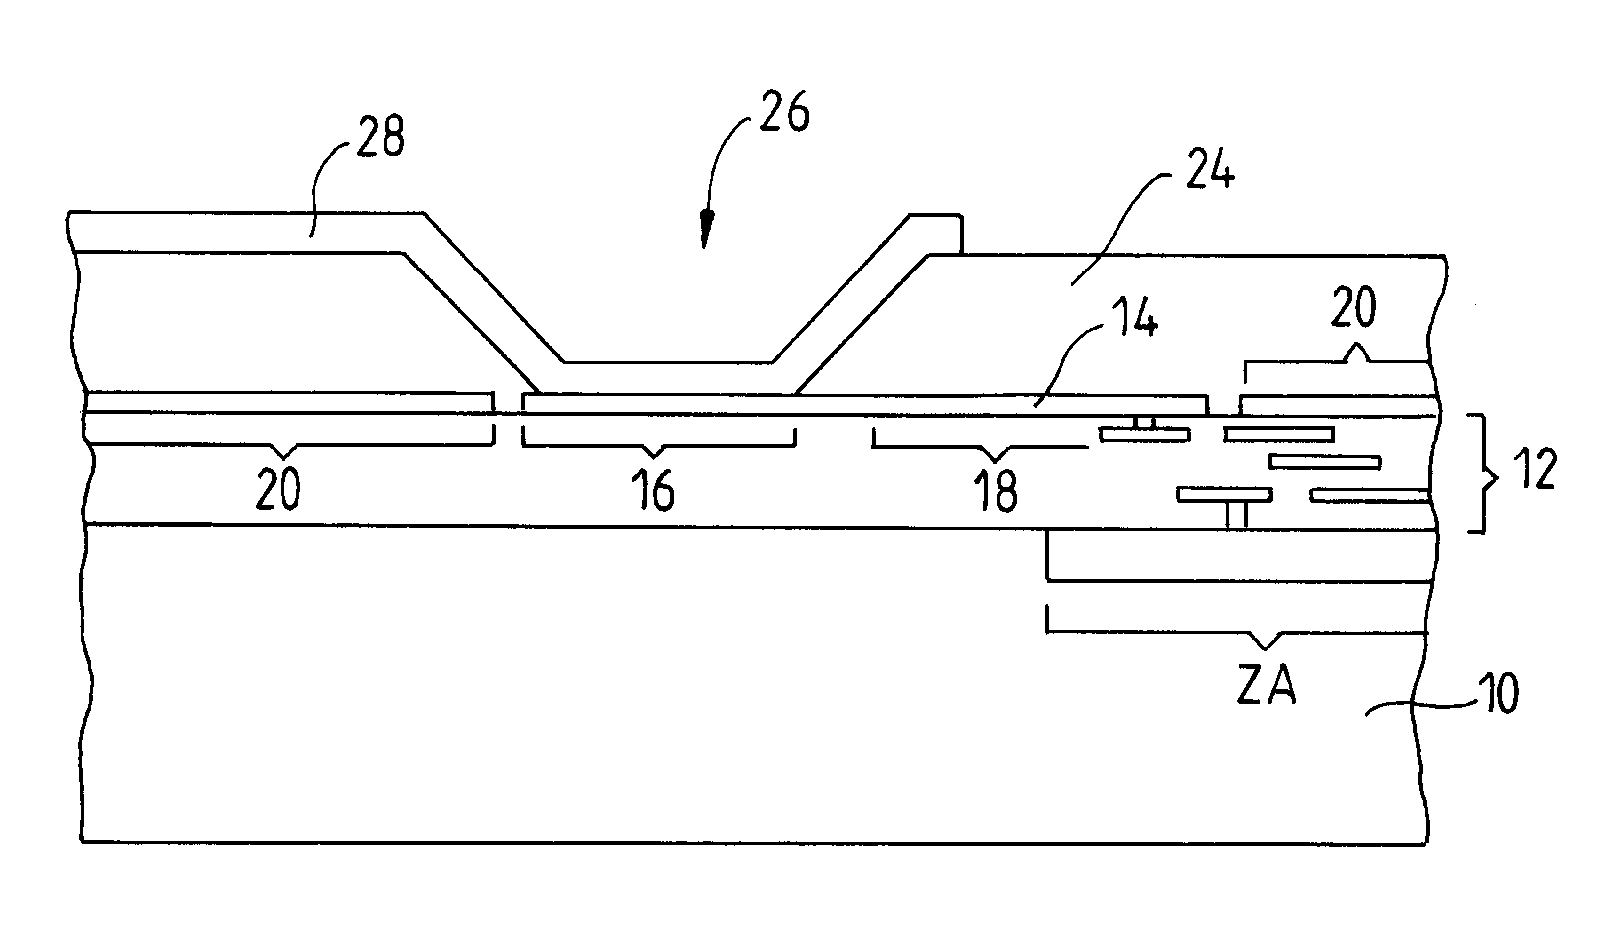 Silicon integrated circuit operating at microwave frequencies and fabrication process